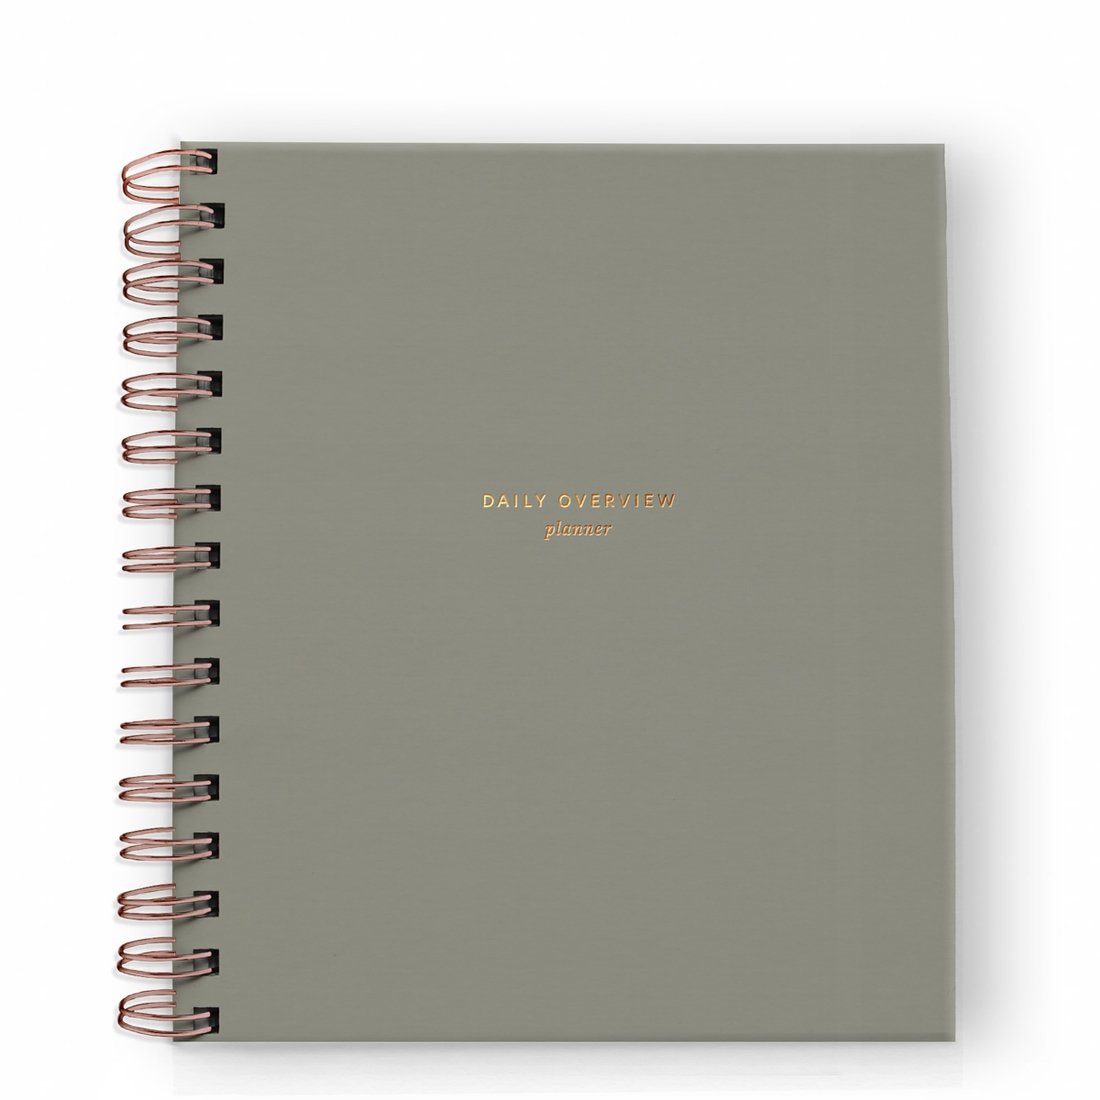 Daily Overview Planner Undated - Light Sage